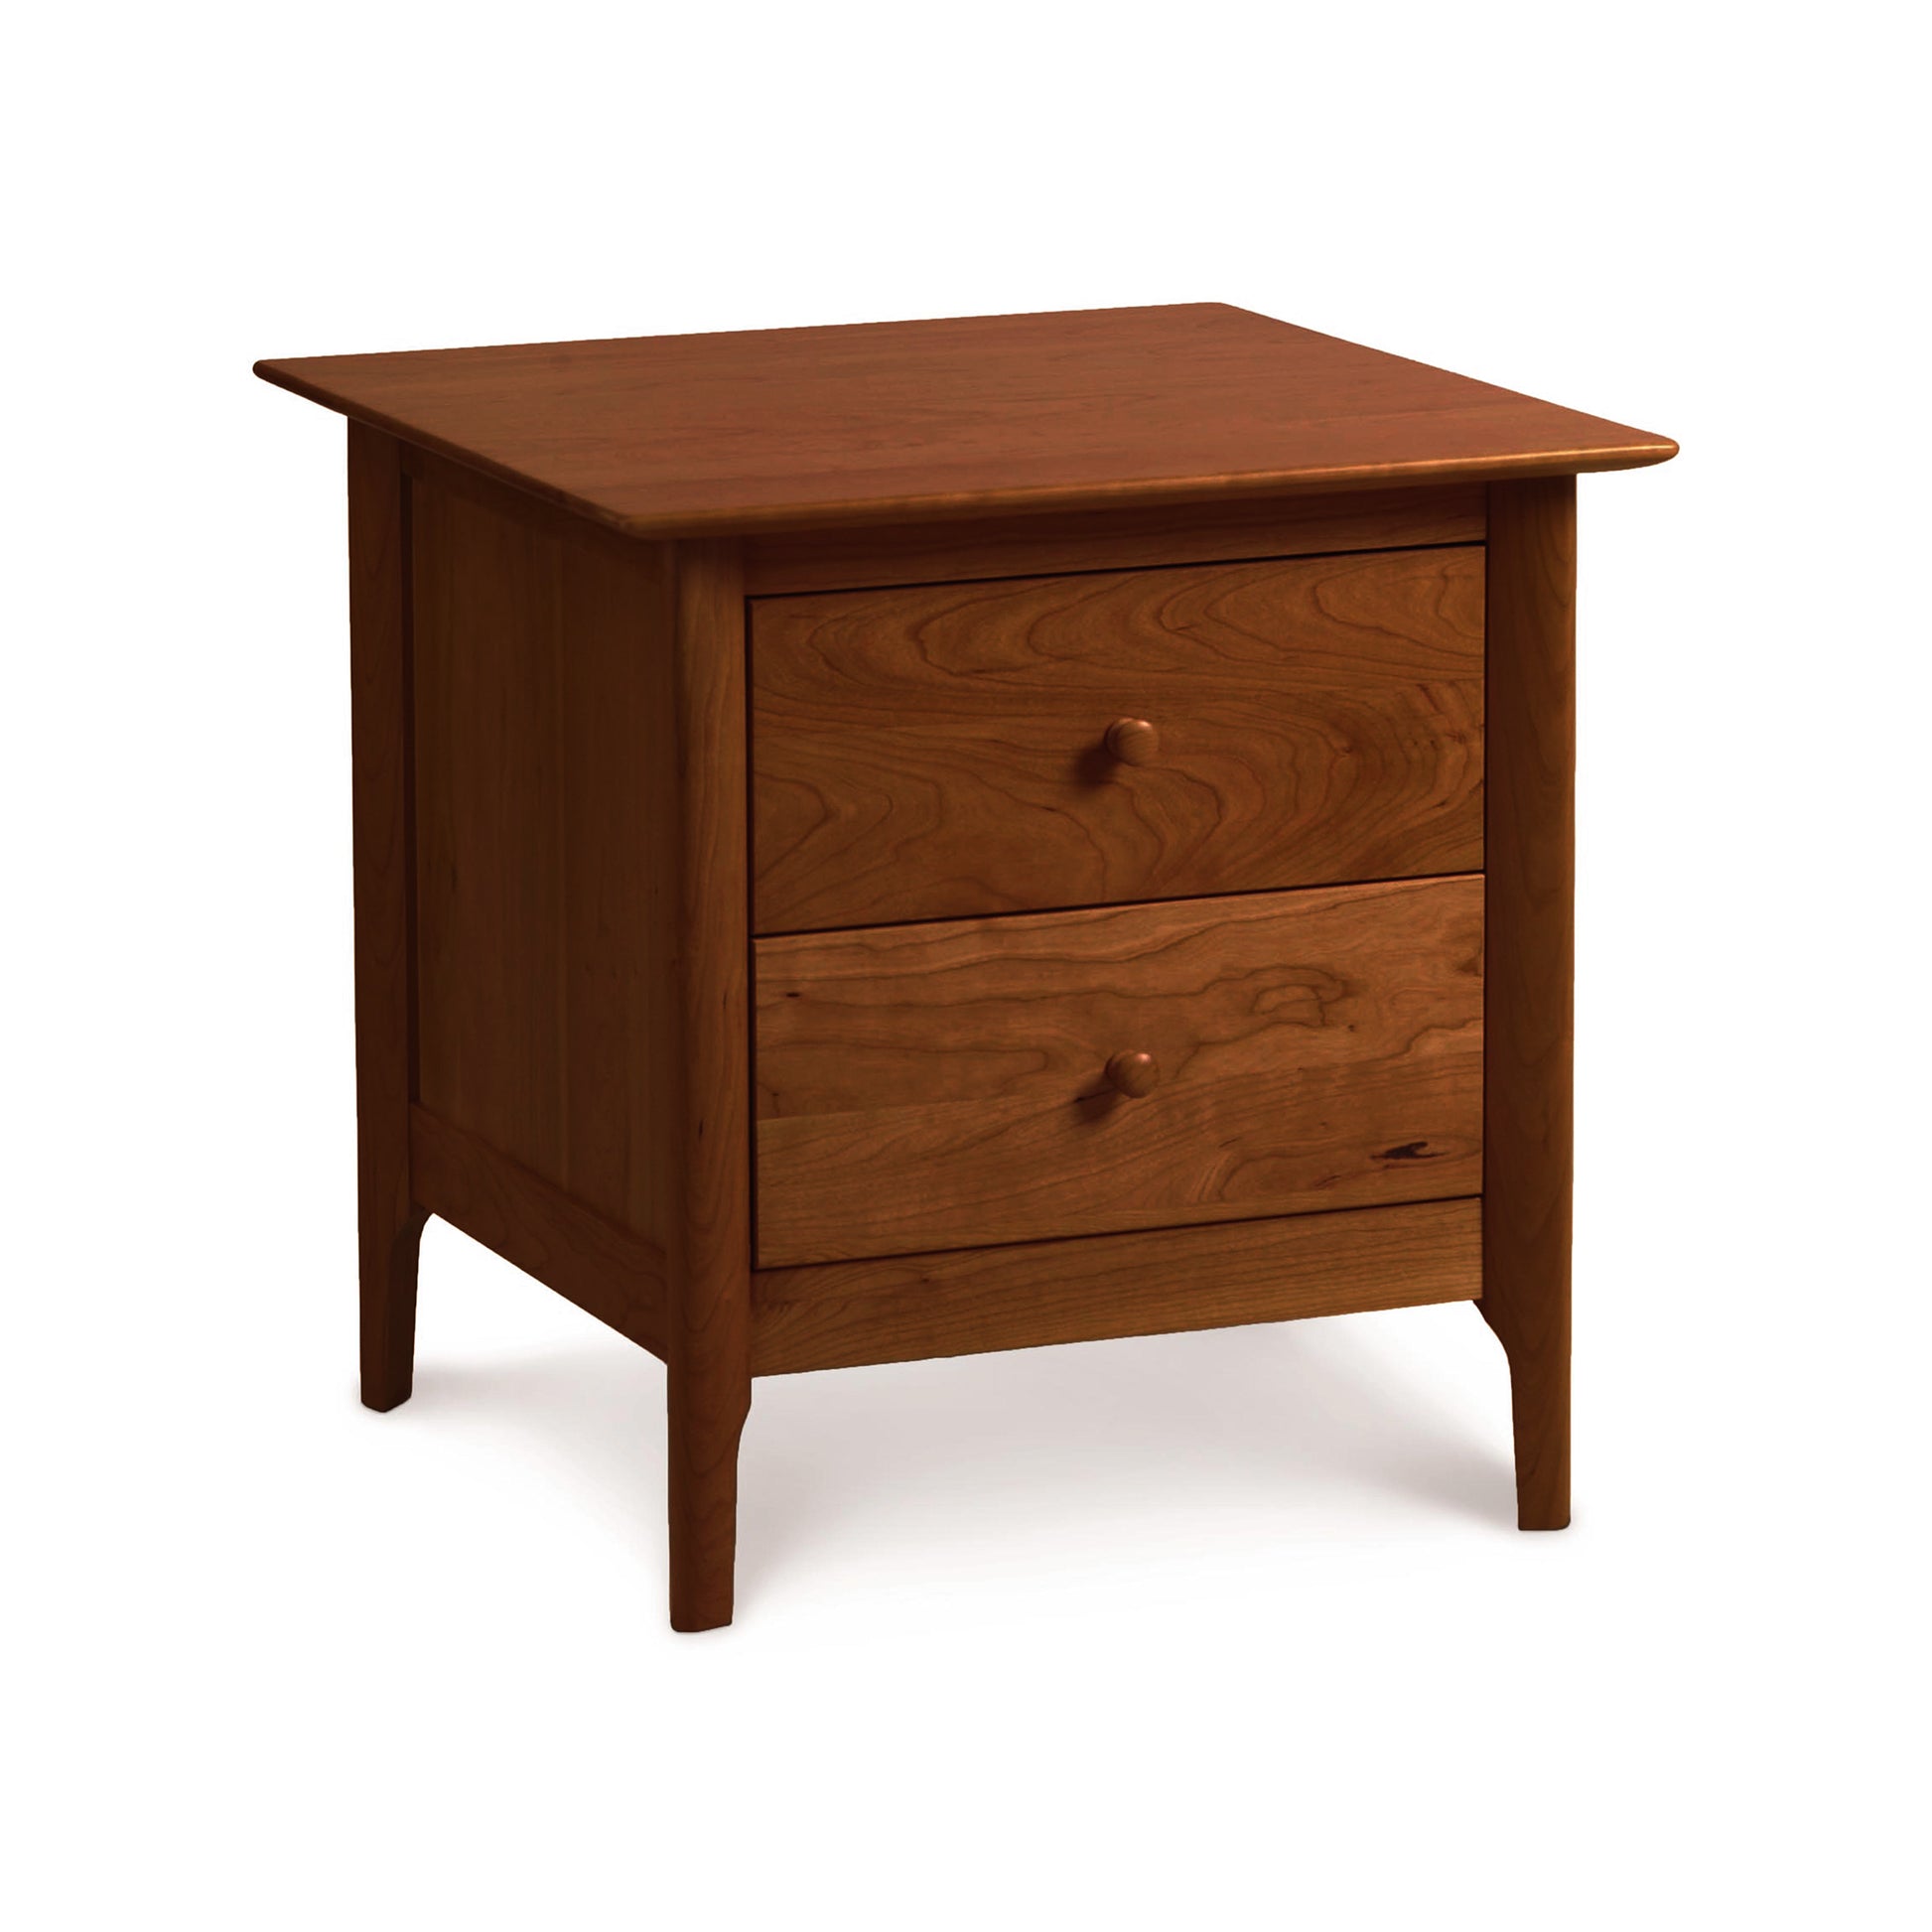 The Sarah 2-Drawer Nightstand from the Shaker-style Copeland Furniture Collection is a small nightstand handmade in Vermont.